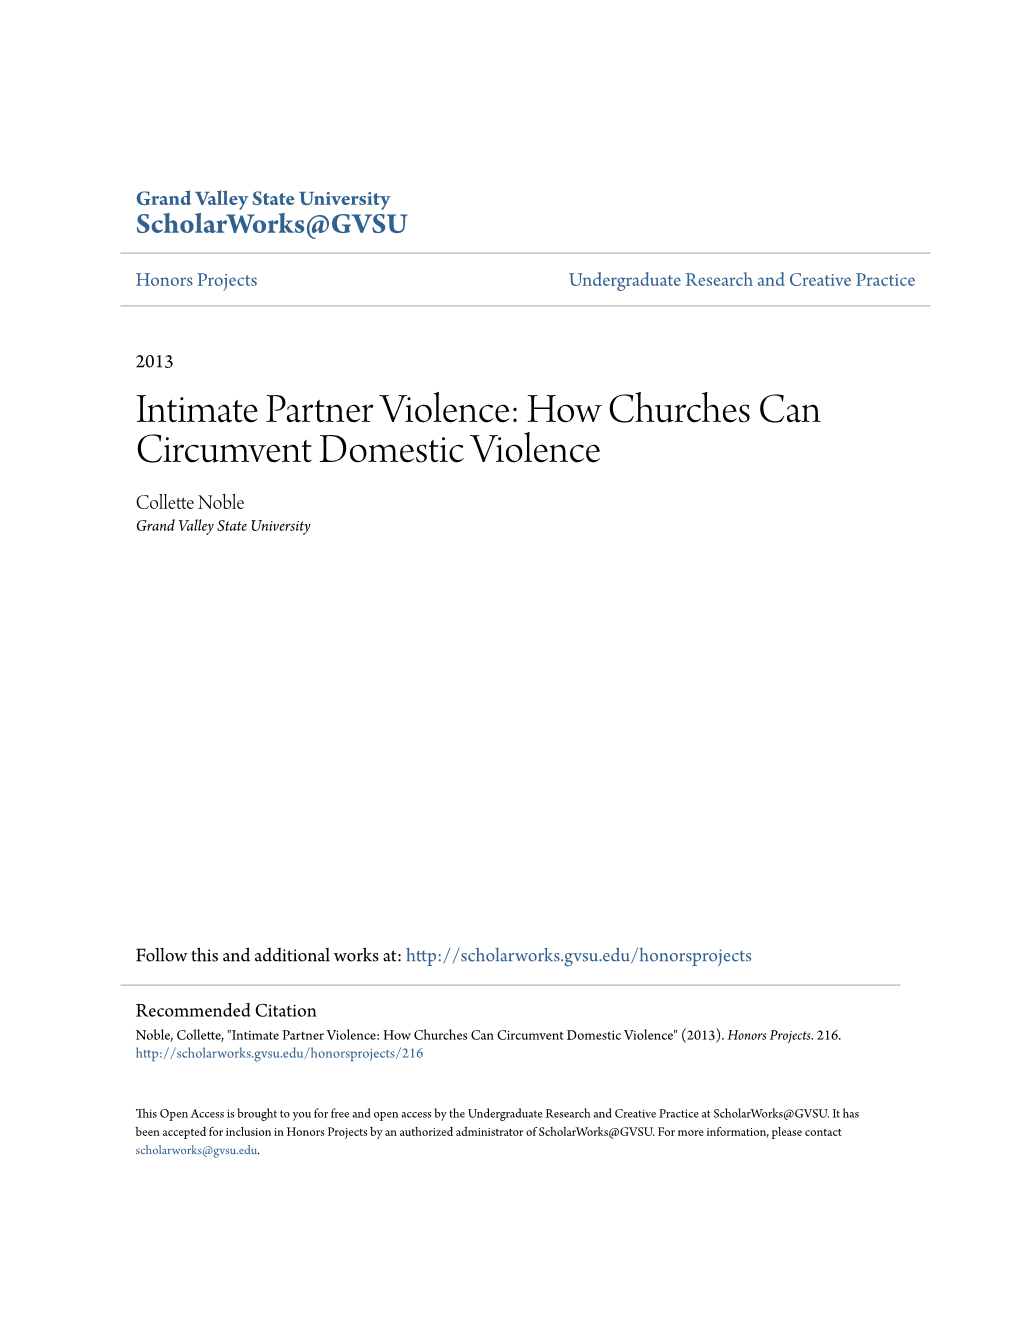 Intimate Partner Violence: How Churches Can Circumvent Domestic Violence Collette Noble Grand Valley State University